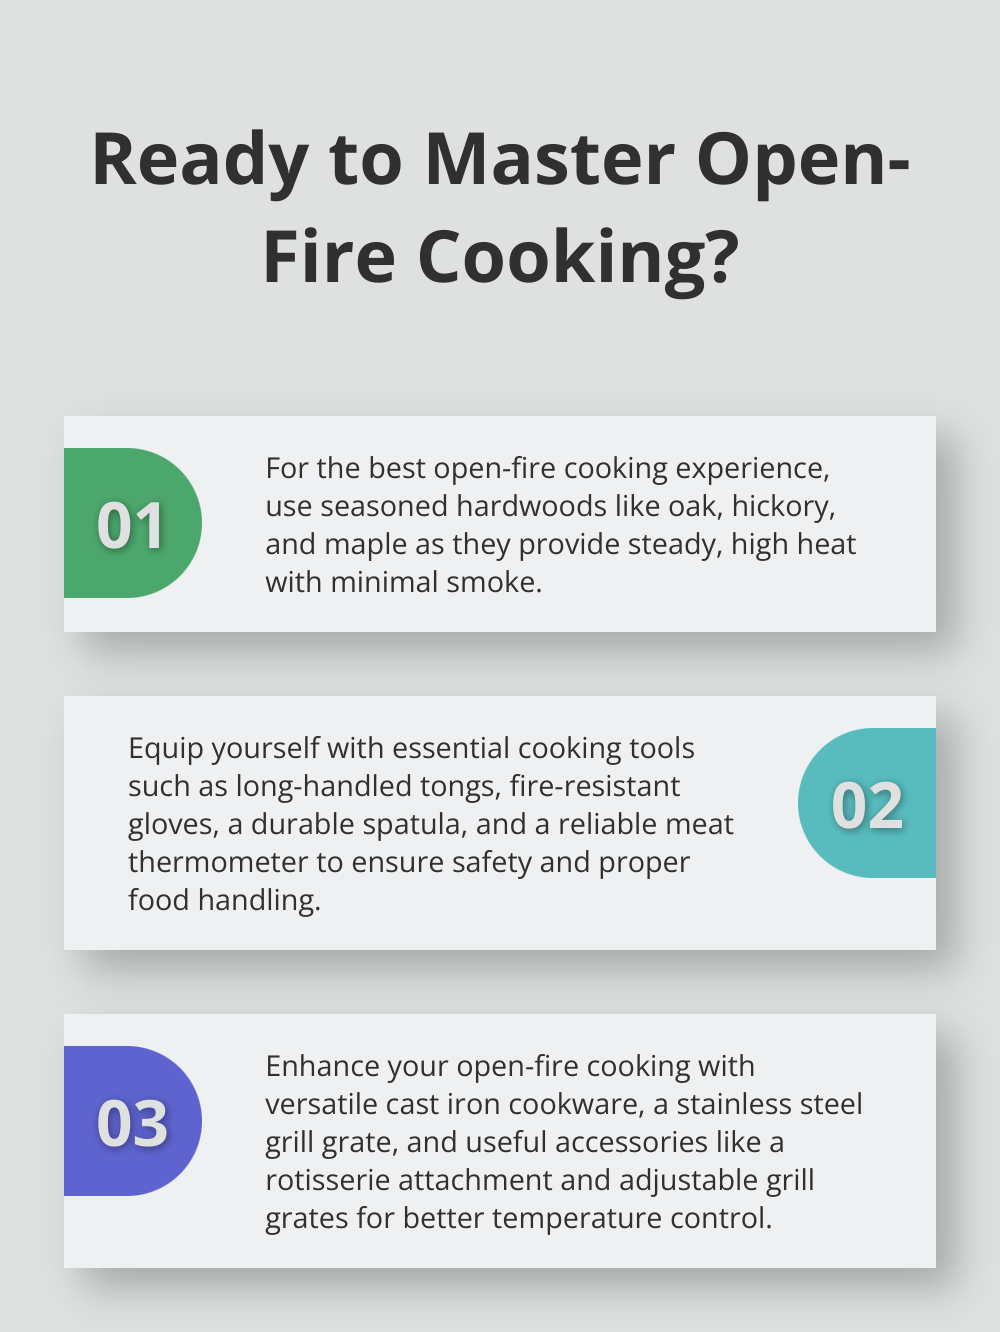 Fact - Ready to Master Open-Fire Cooking?